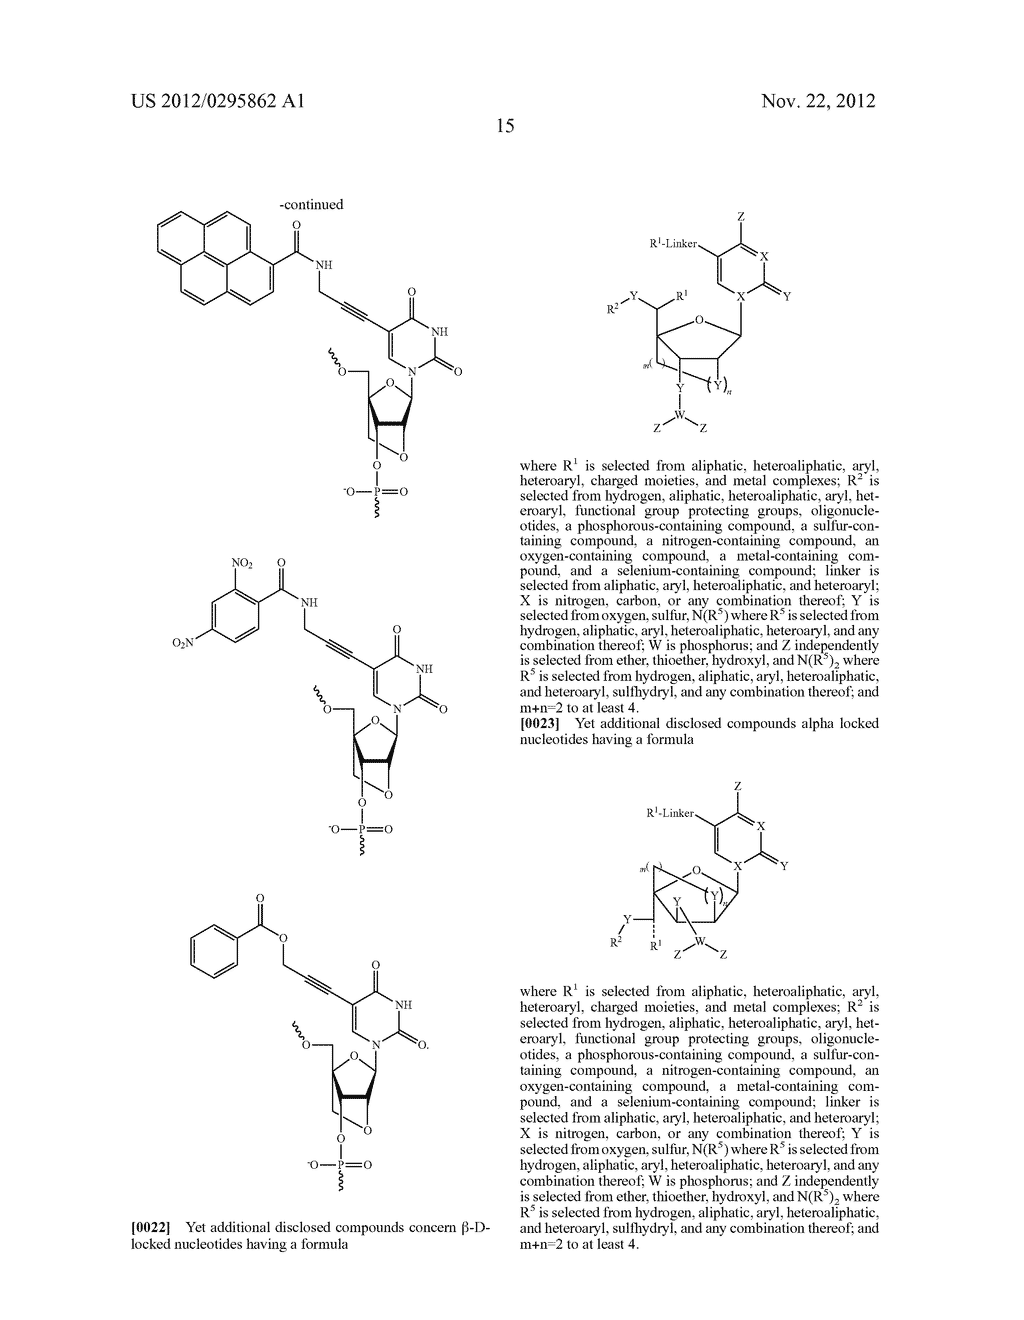 NUCLEOBASE-FUNCTIONALIZED CONFORMATIONALLY RESTRICTED NUCLEOTIDES AND     OLIGONUCLEOTIDES FOR TARGETING OF NUCLEIC ACIDS - diagram, schematic, and image 24